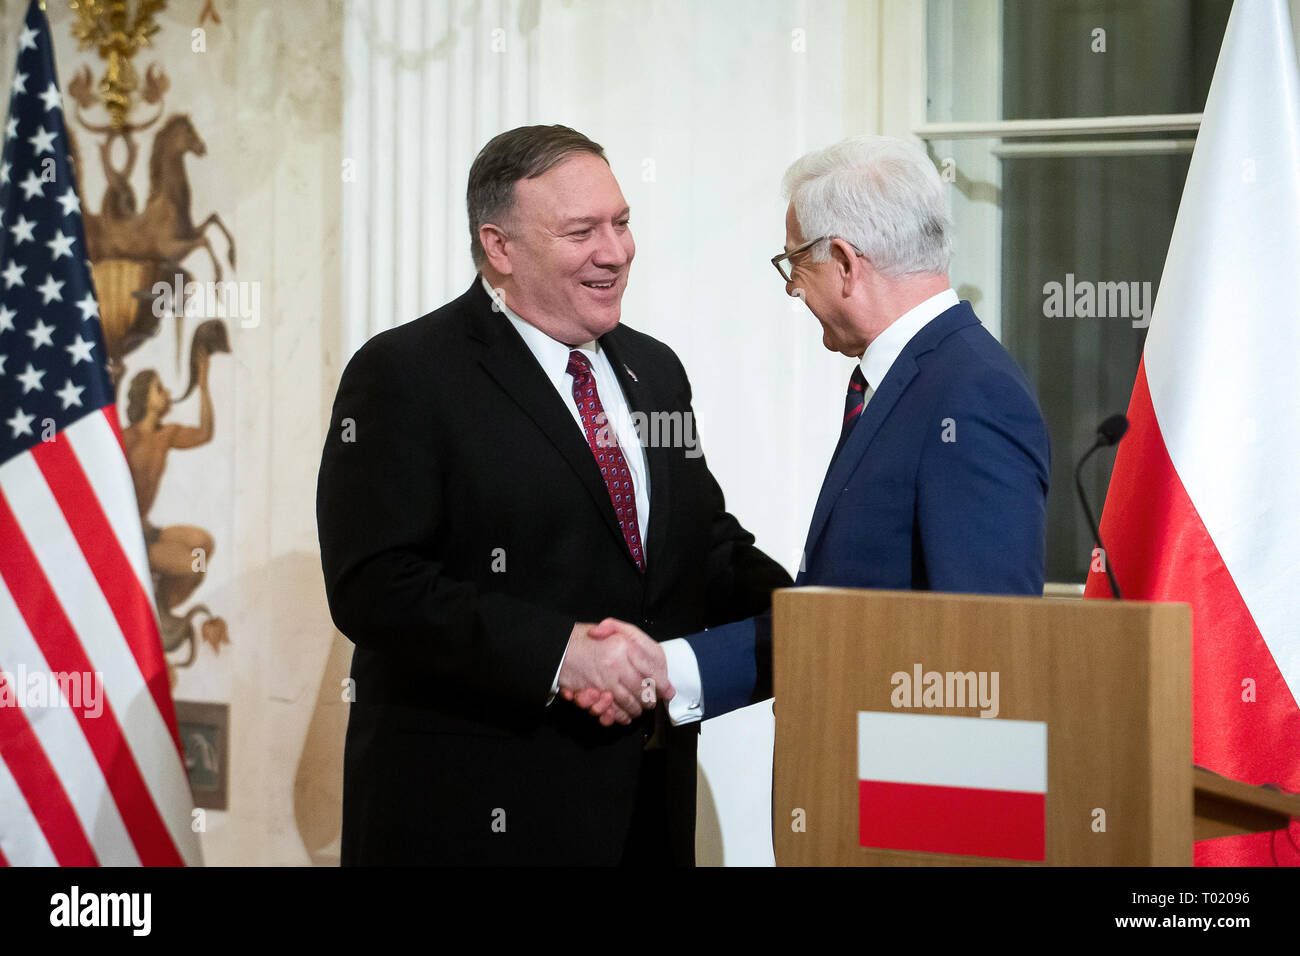 Polish Foreign Minister Jacek Czaputowicz (R) and US Secretary of State Mike Pompeo (L) shake hands during a press conference after their meeting at the Lazienki Park in Warsaw, Poland on 12 February 2019 Stock Photo